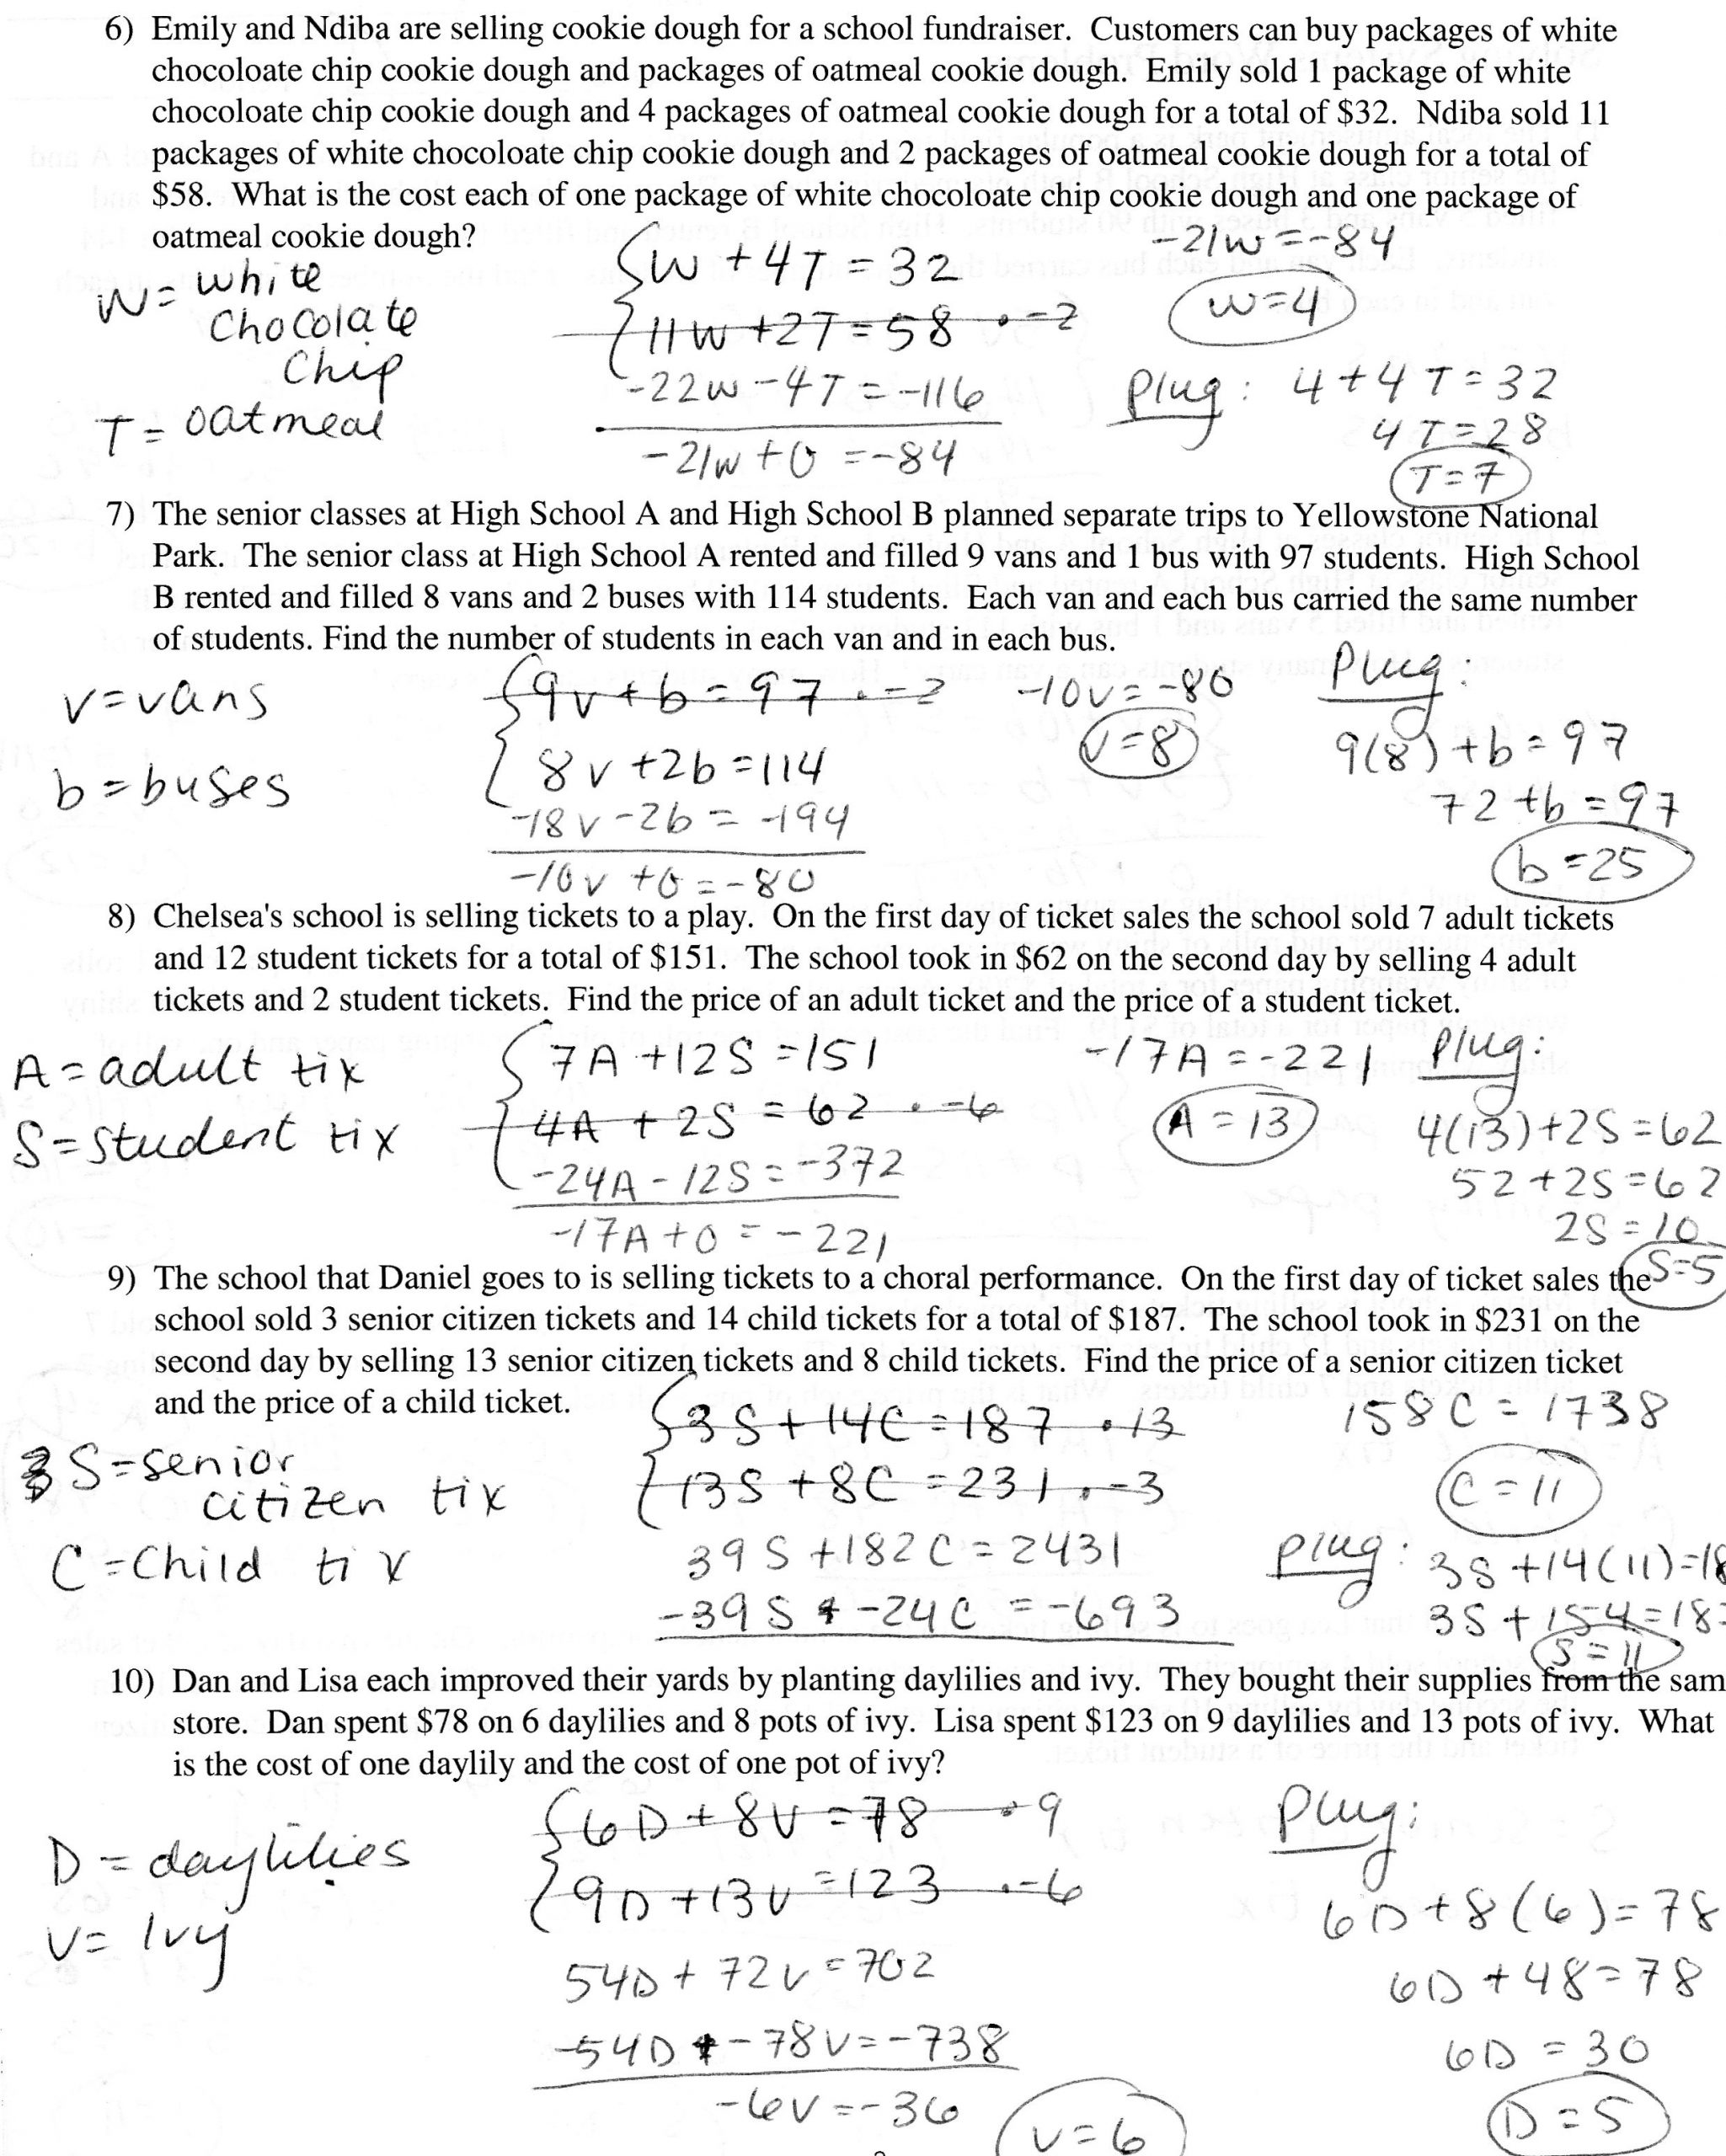 solving systems of equations word problems worksheet free